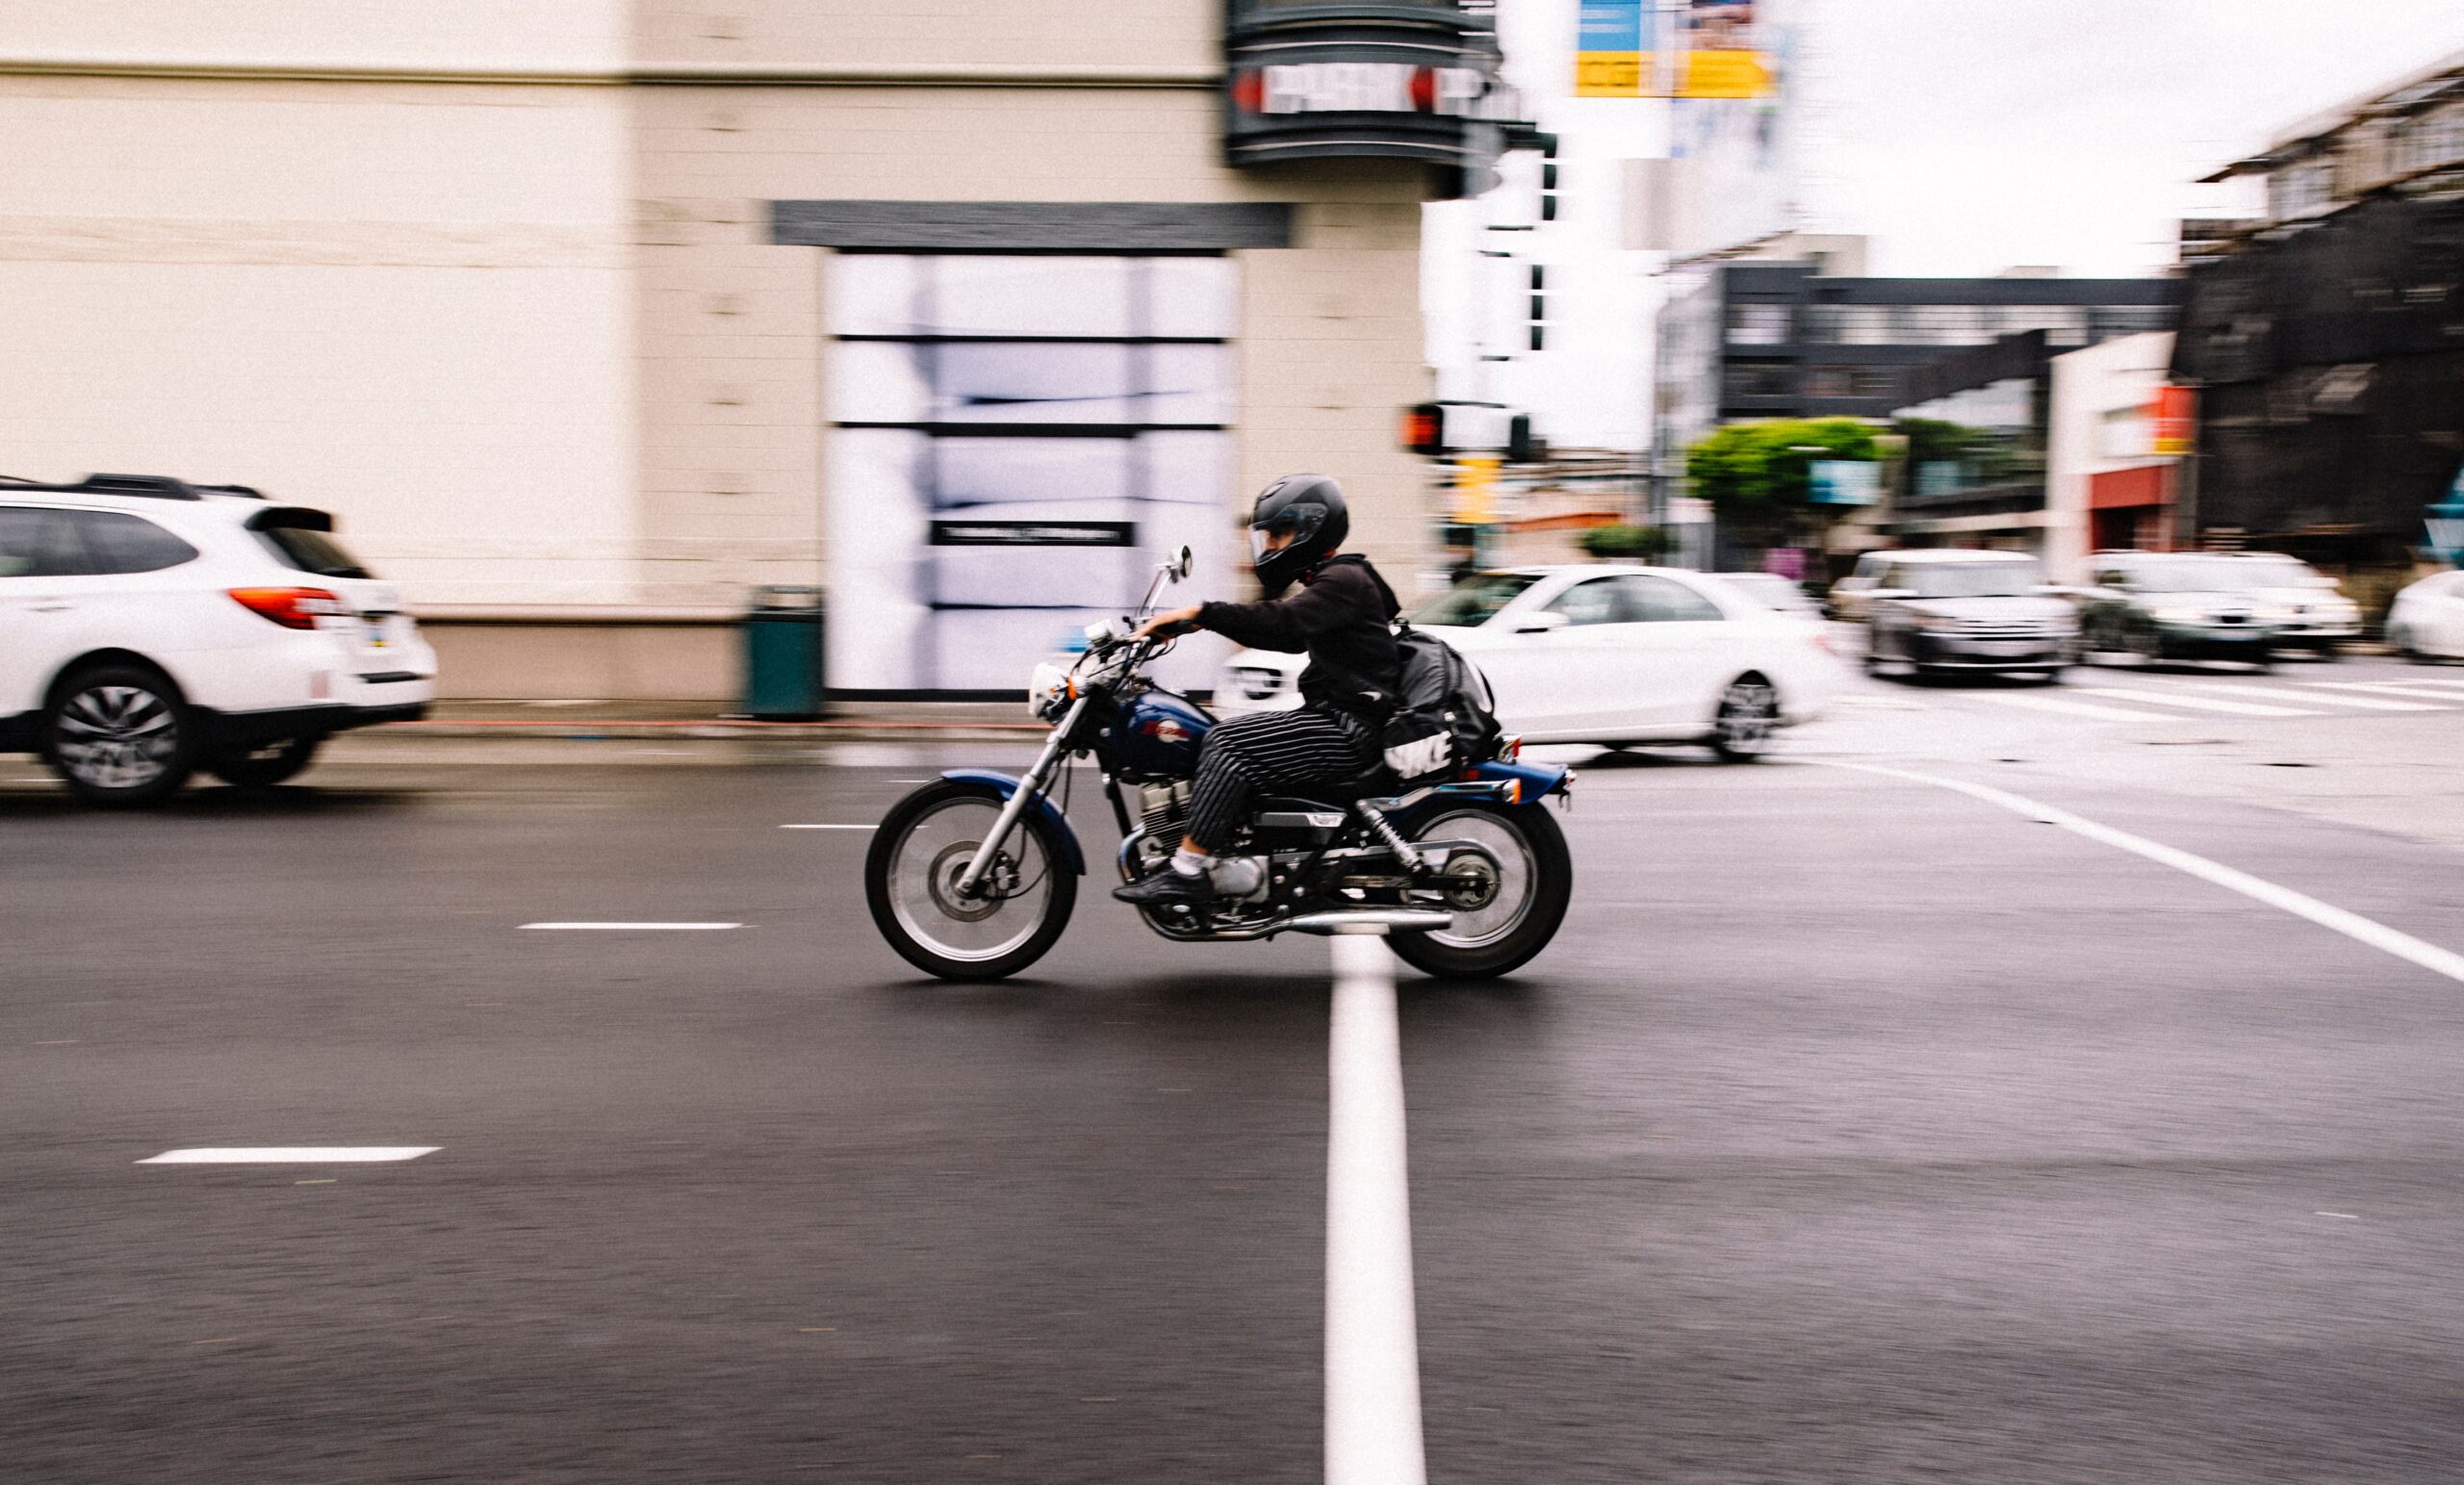 How to Choose the Right Luxury Motorcycle for City Riding